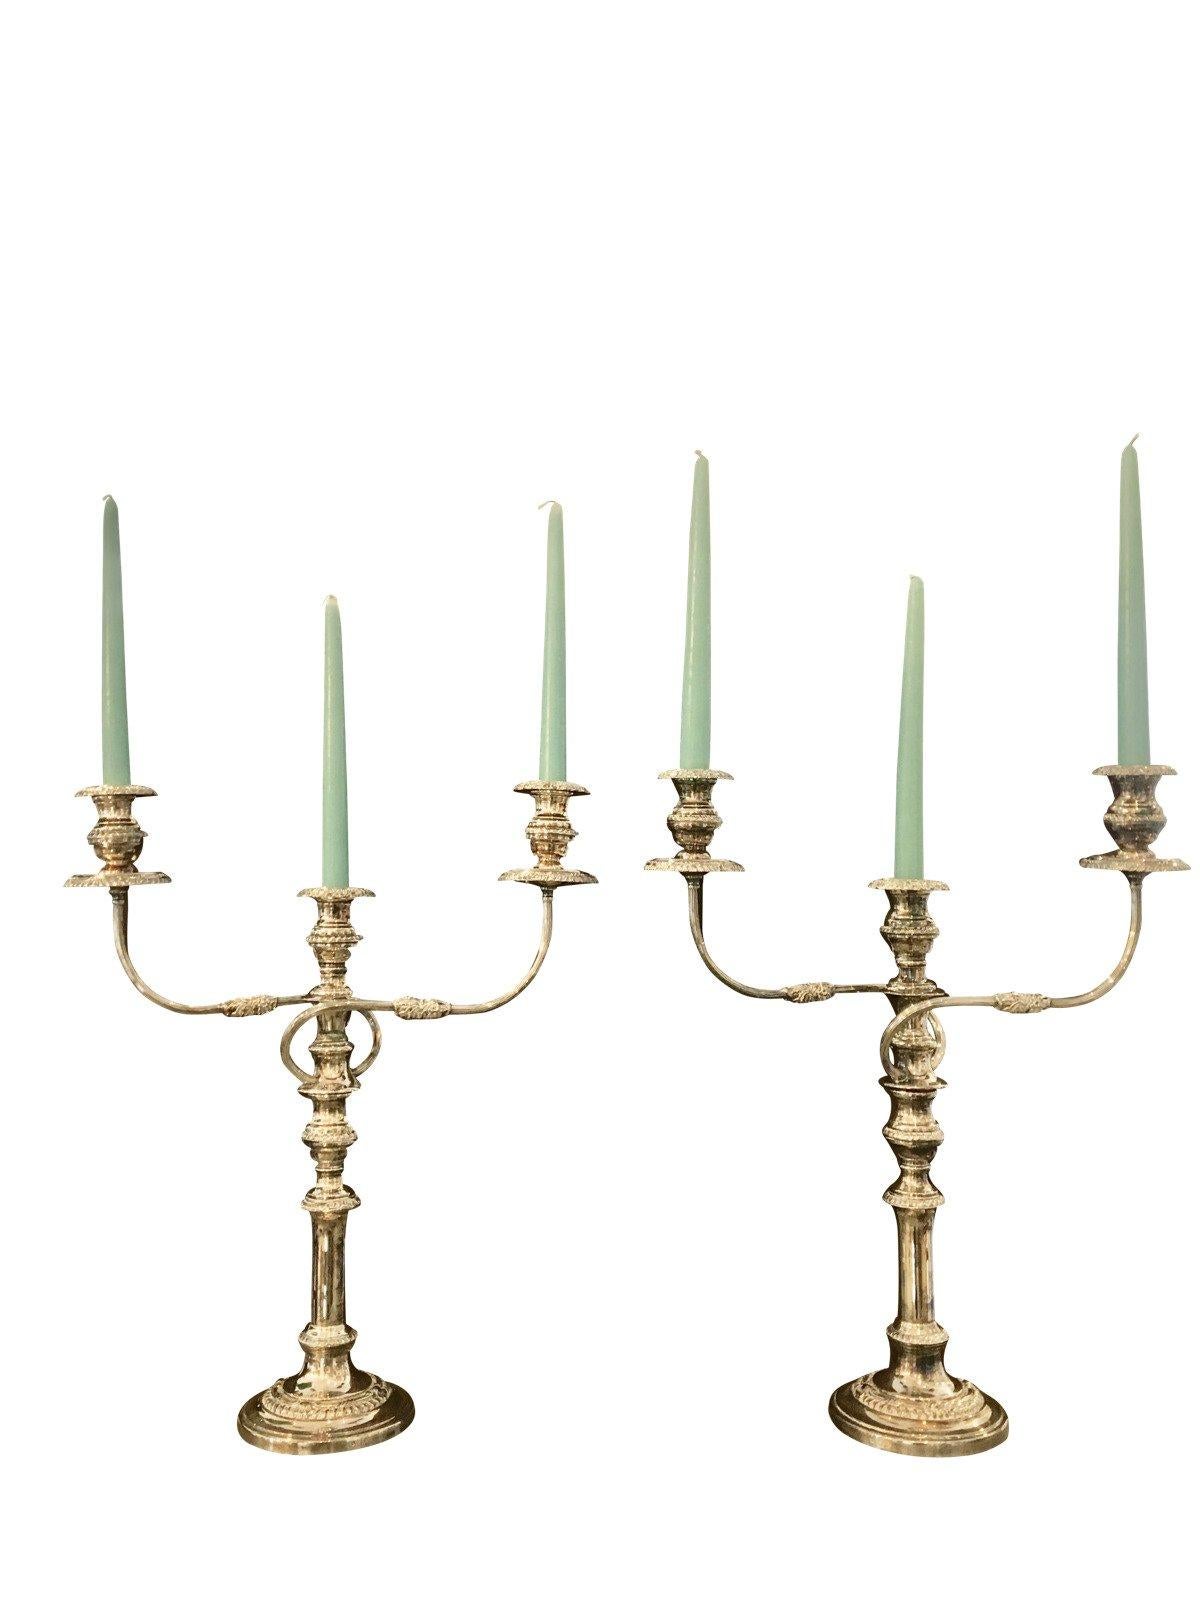 Pair of English 19th century Sheffield plate candelabra, each in two parts, with gadrooning, three lights and flame finials.